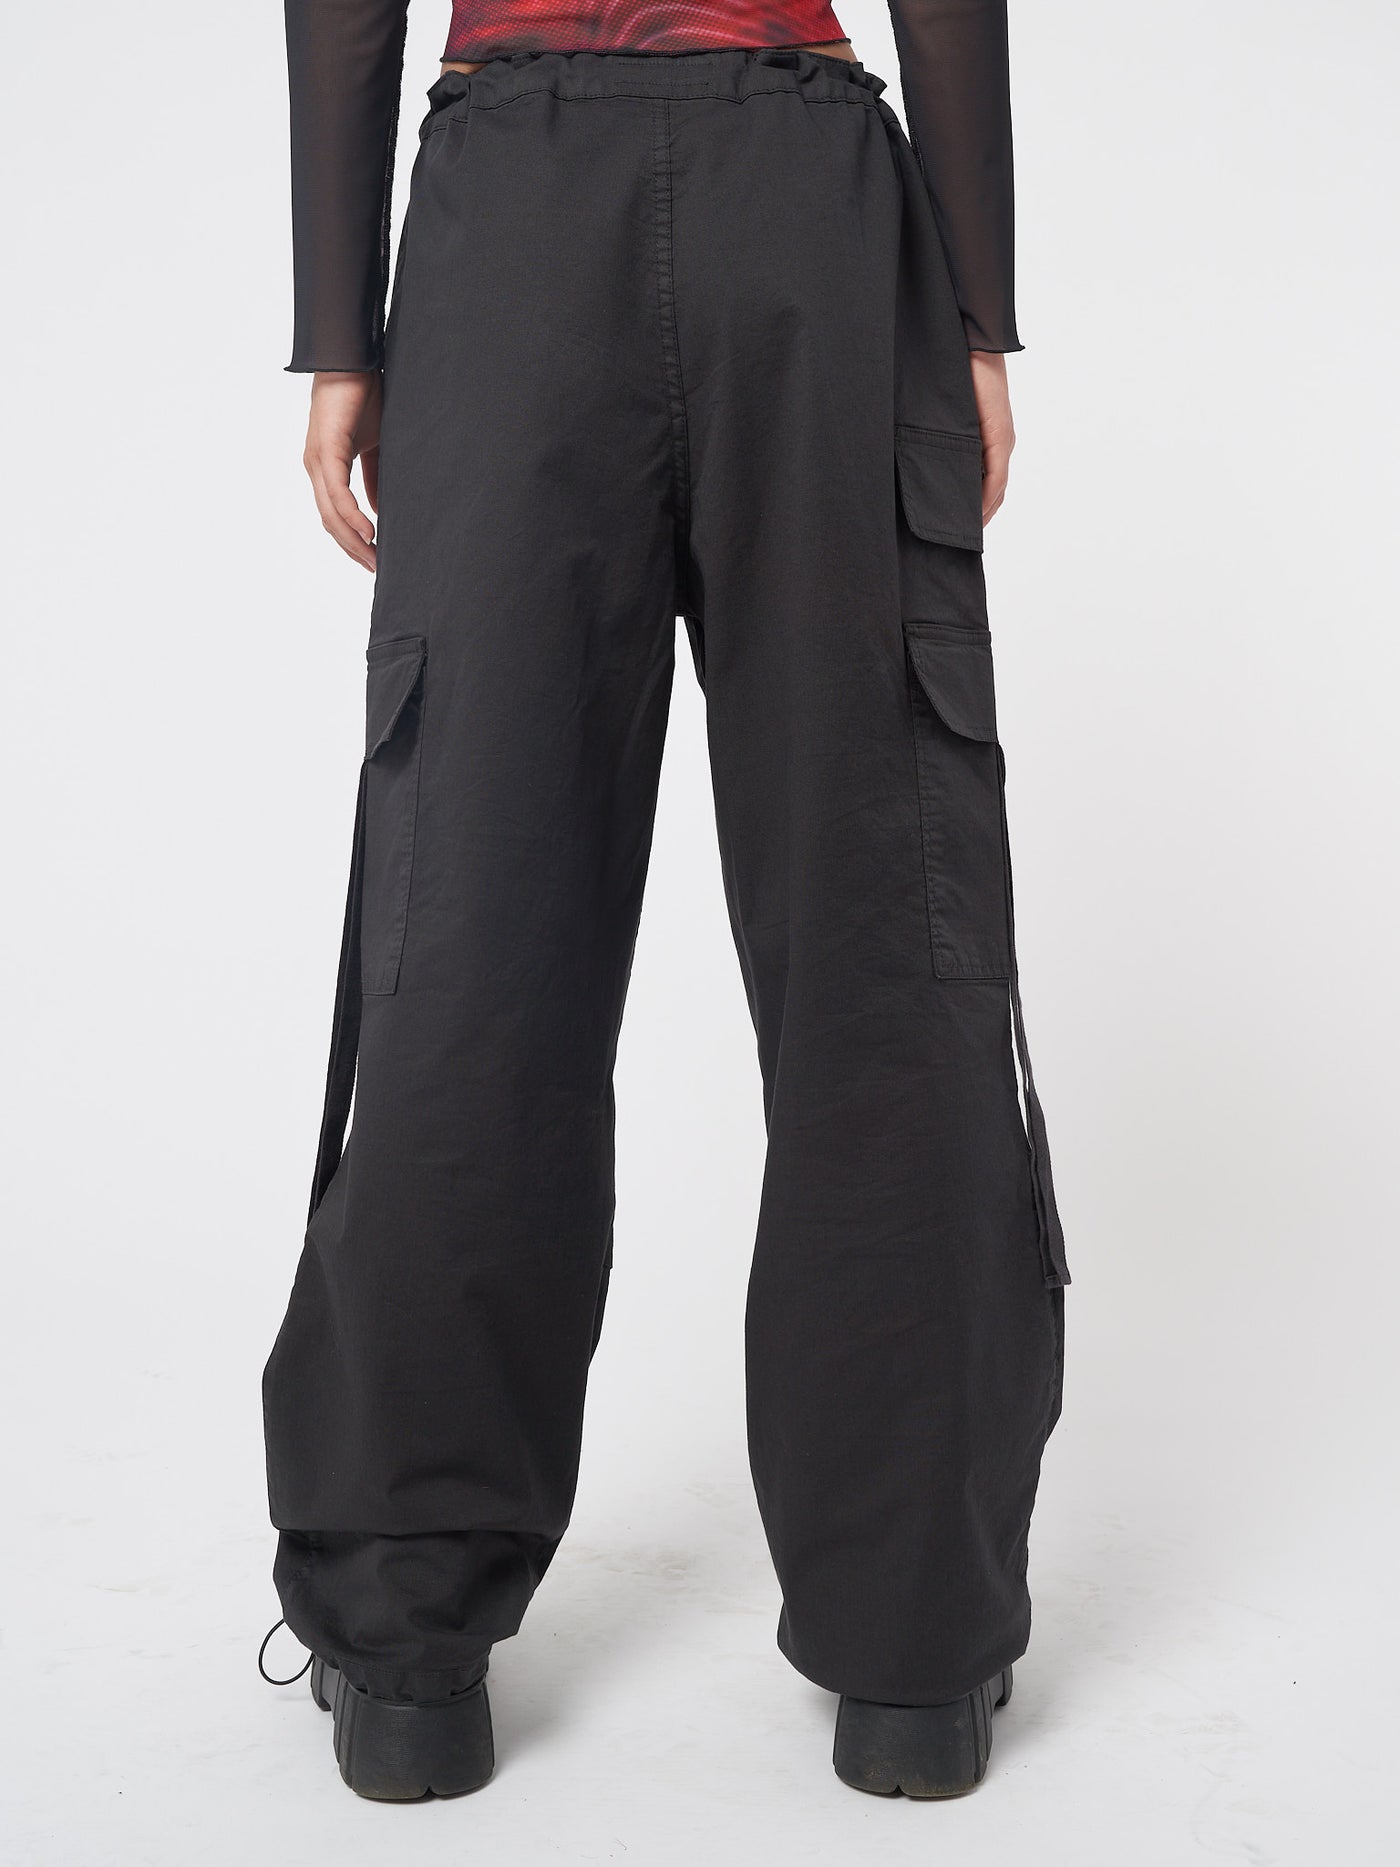 Black tech cargo pants in parachute style with side utility pockets 